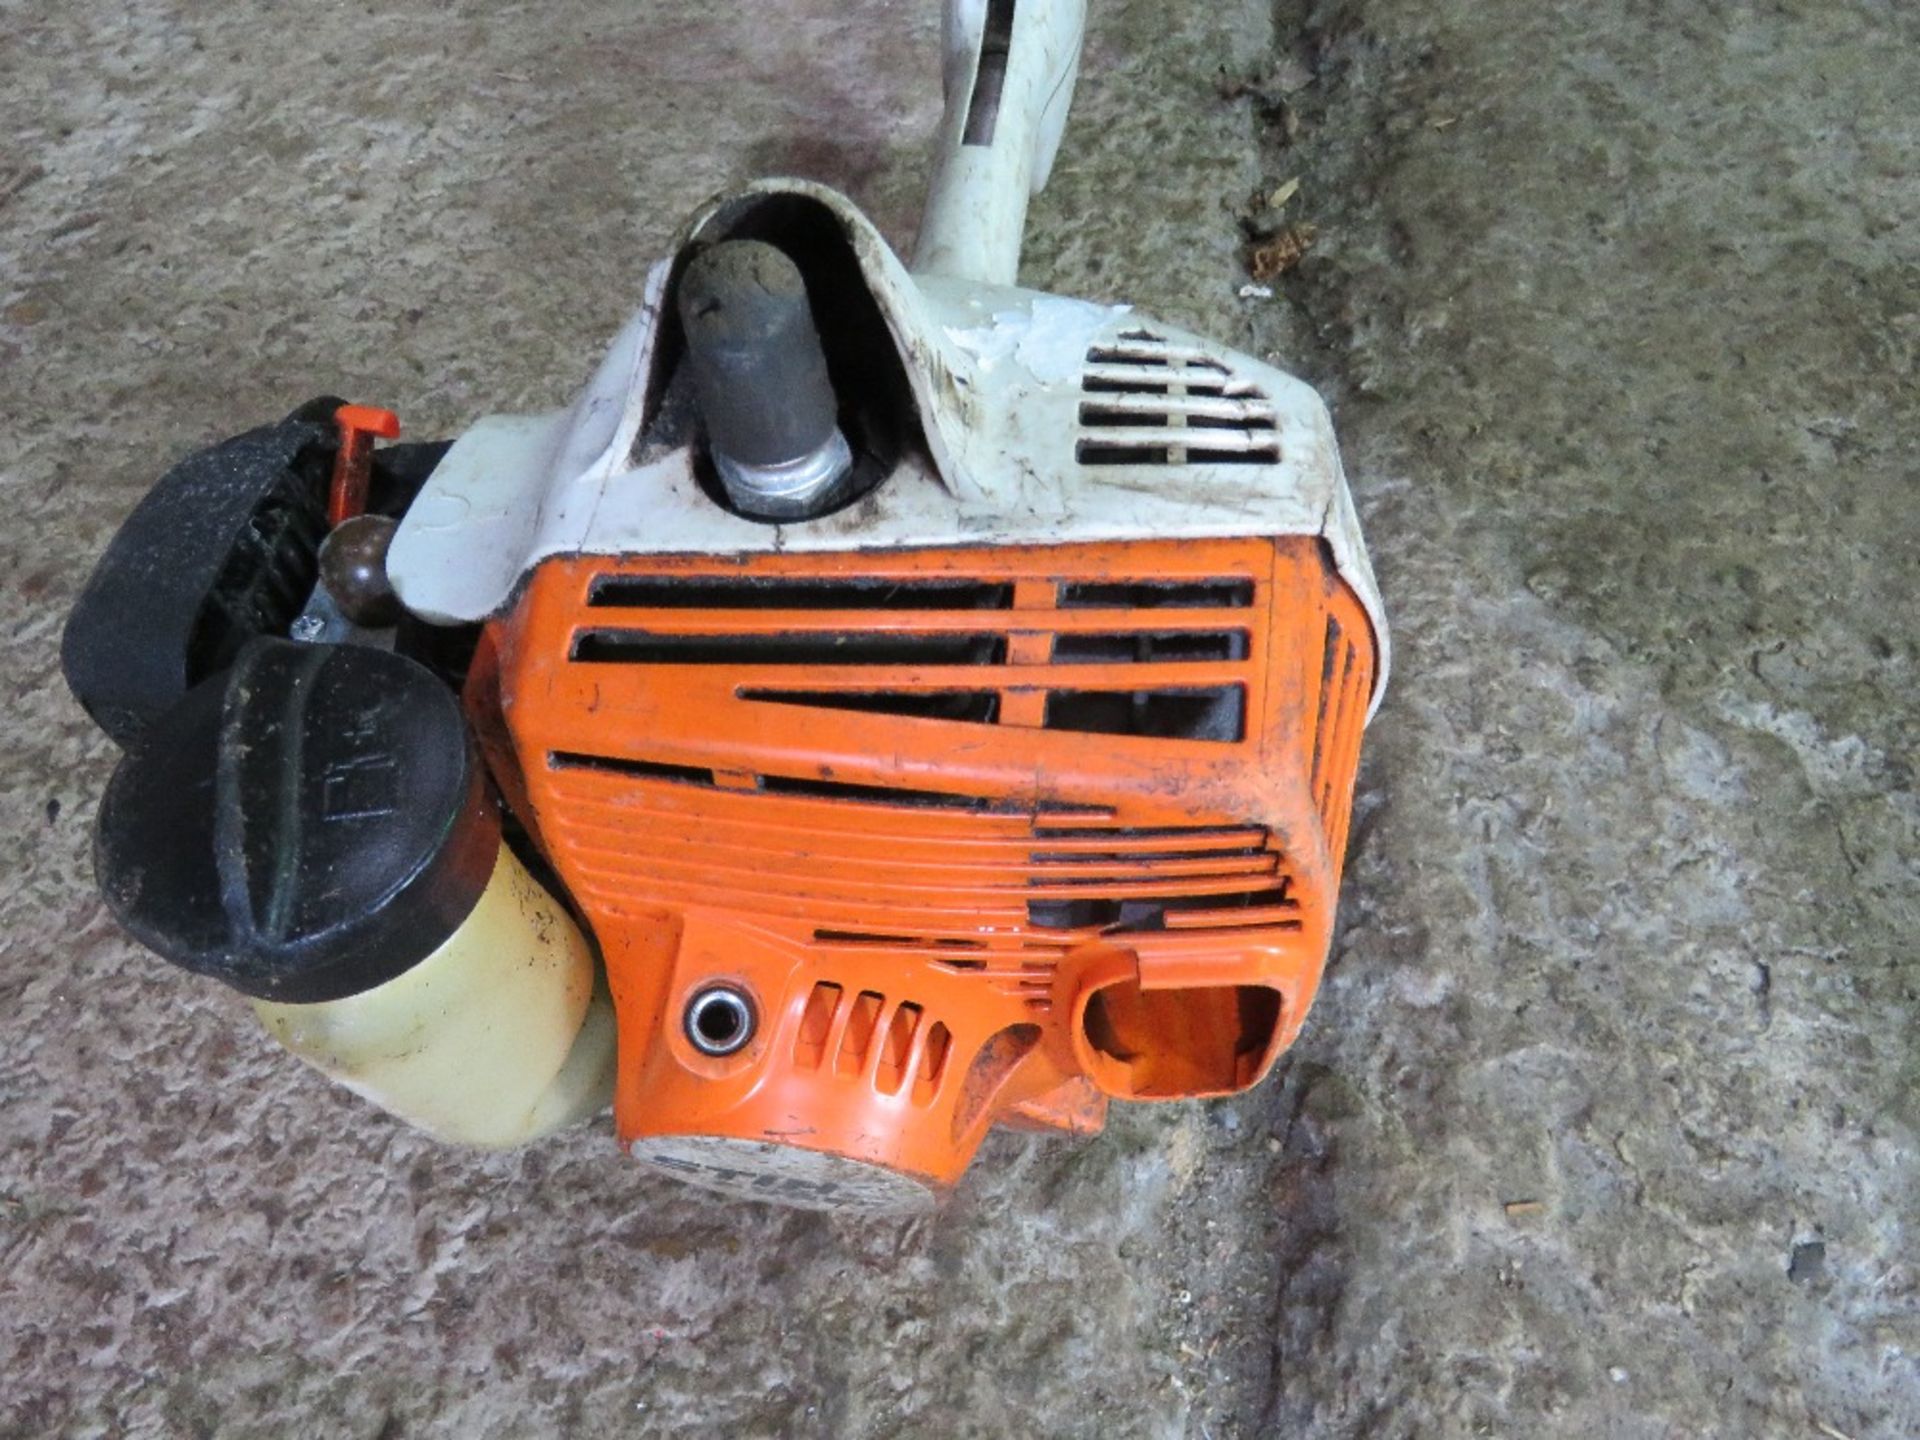 STIHL STRIMMER, REQUIRES RECOIL ROPE. DIRECT FROM LANDSCAPE MAINTENANCE COMPANY DUE TO DEPOT CLO - Image 6 of 6